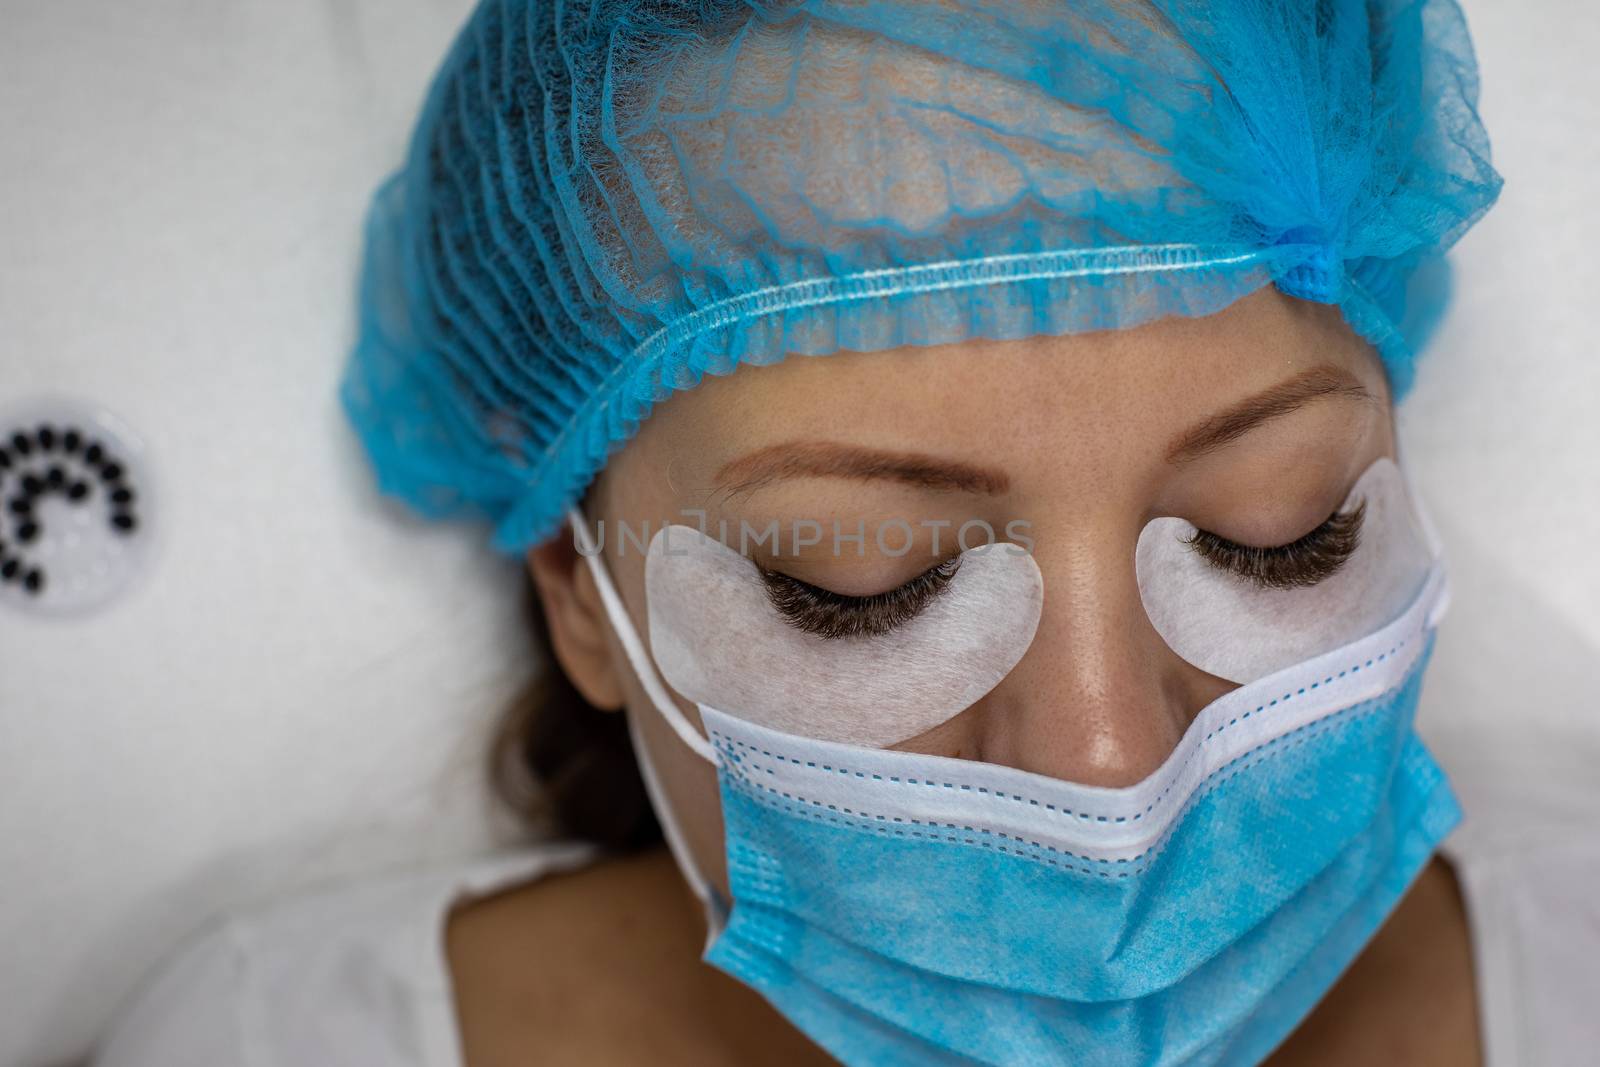 Treatment beauty procedure of upgrade Eyelashes Extension during a pandemic with preventive measures. Woman face wirh protective cap and facemask